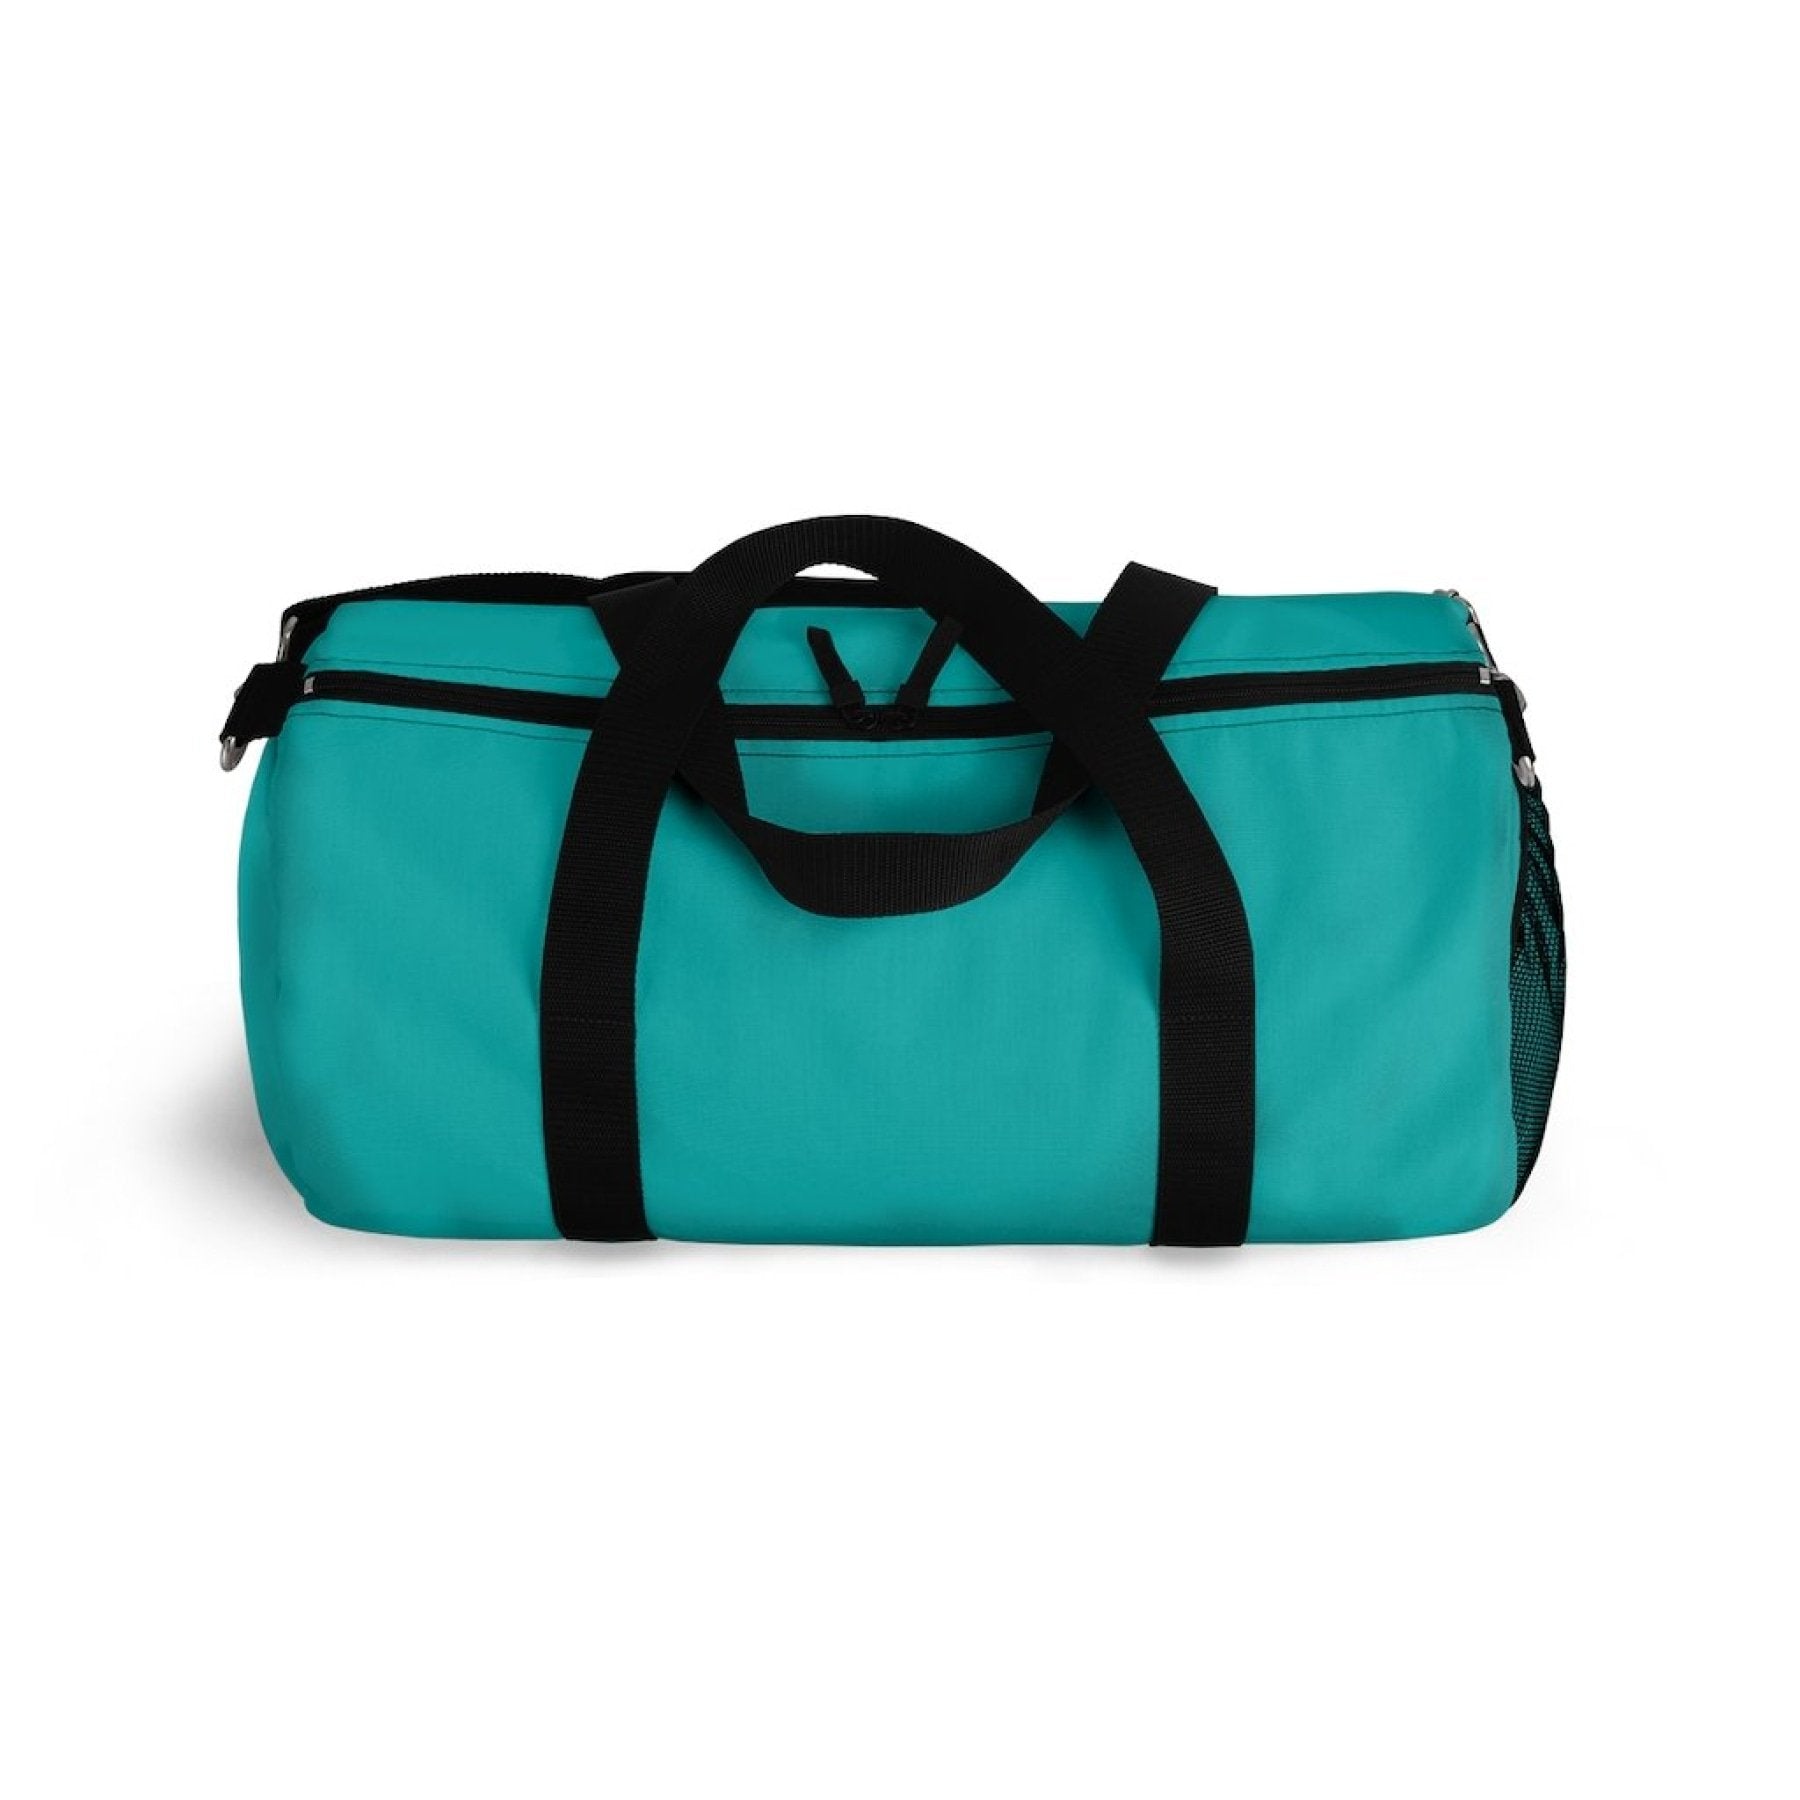 Duffel Bag, Carry On Luggage, Teal Green